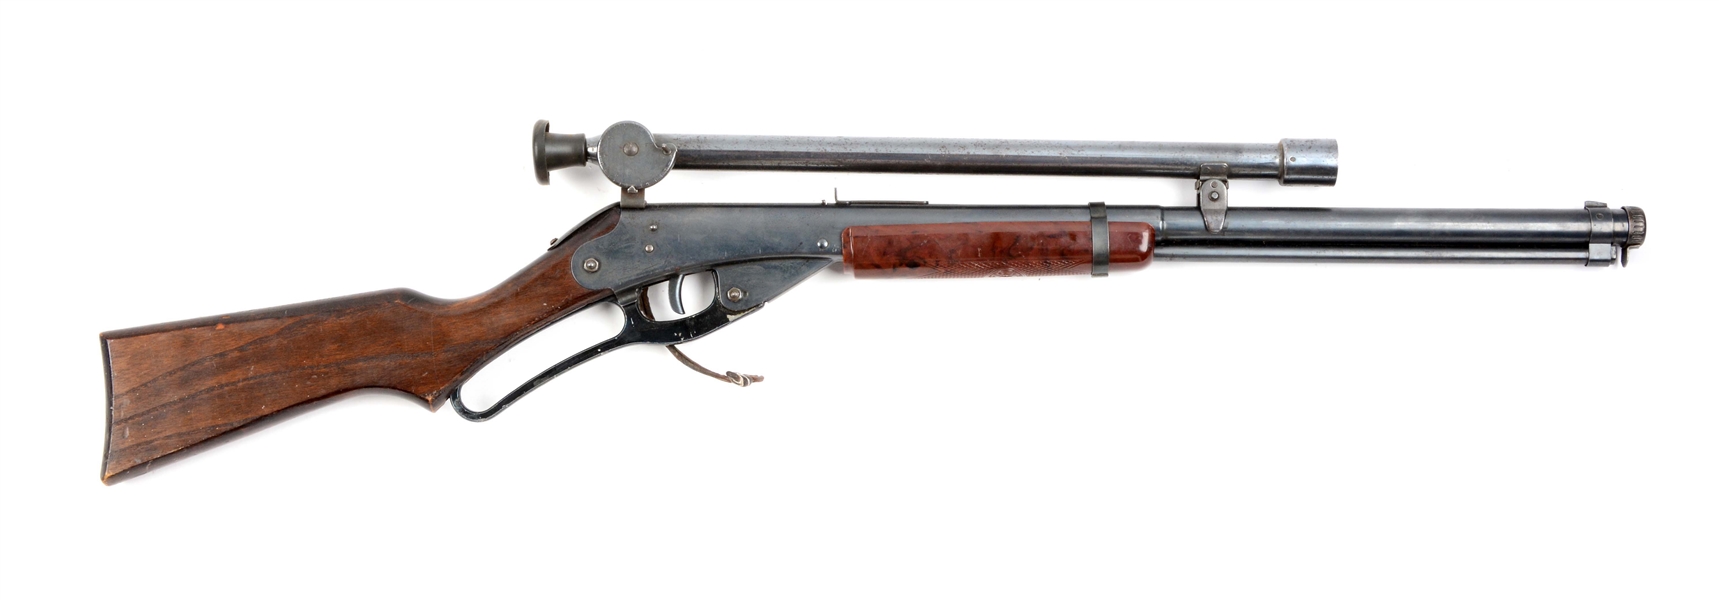 DAISY RED RIDER MODEL 40 WITH NO. 300 TARGET TELESCOPIC SIGHT.